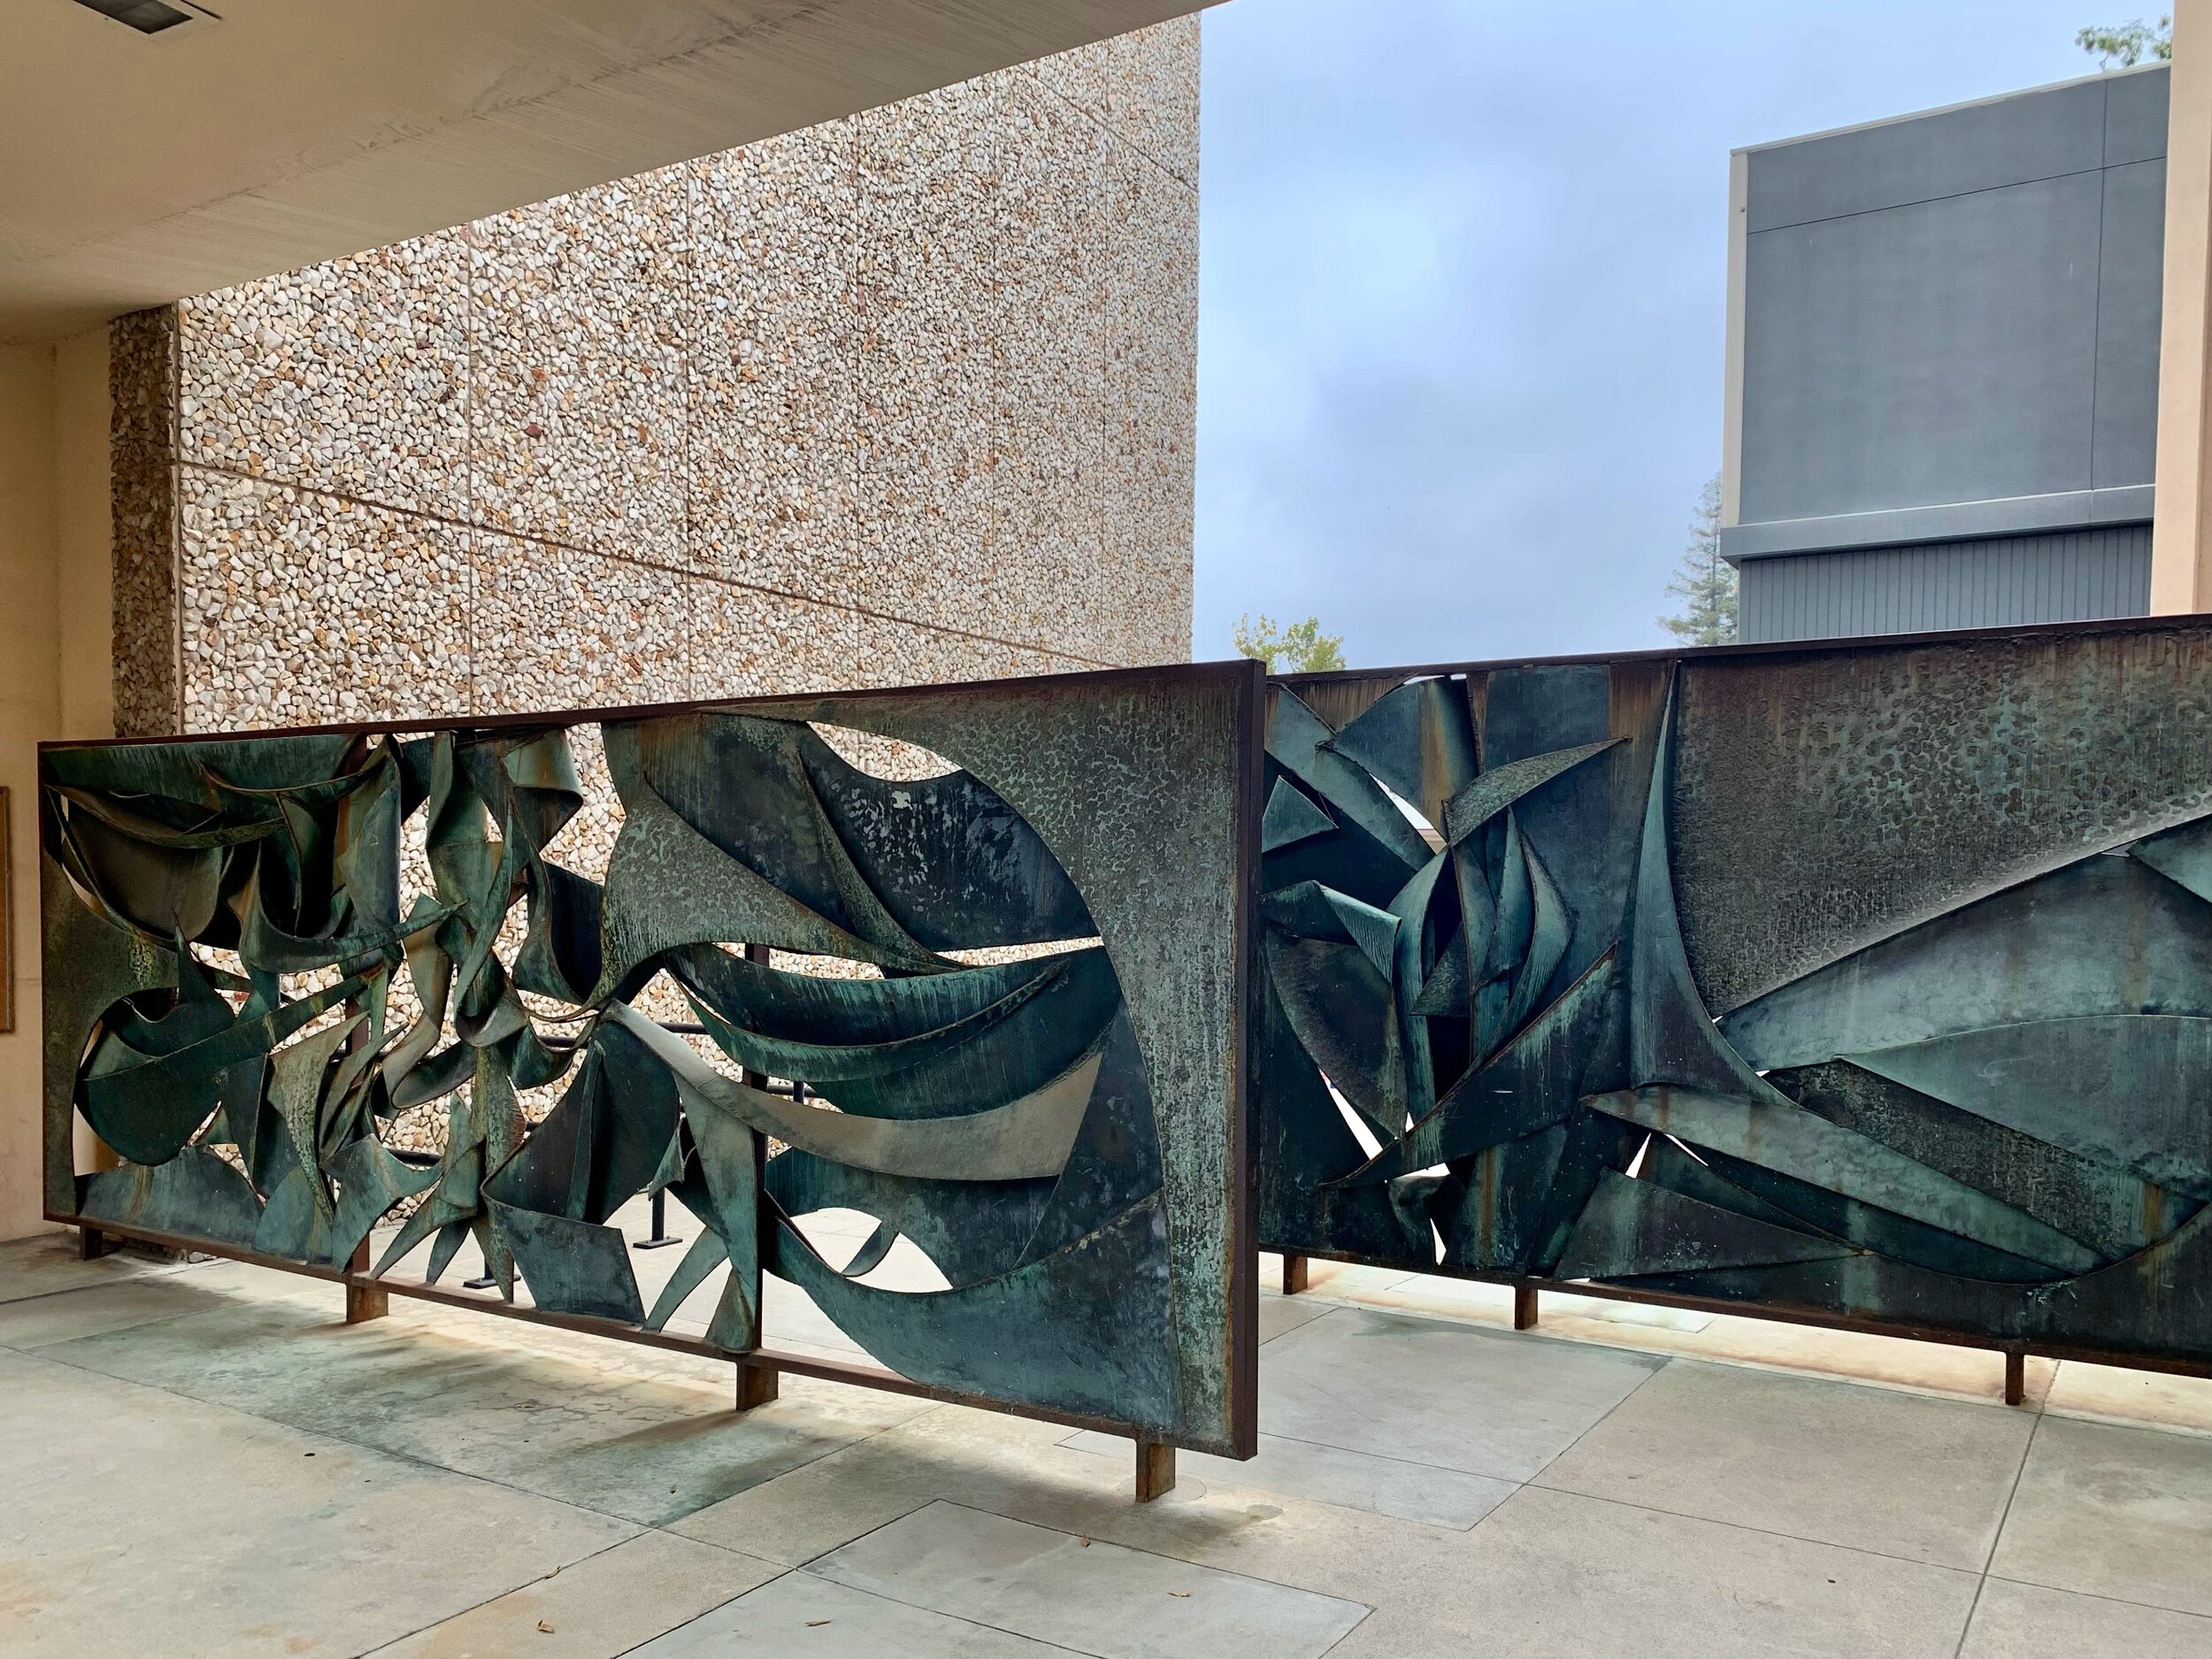  Bronze sculpture located near entrance to Harry G. Steele Laboratory of Electrical Services 